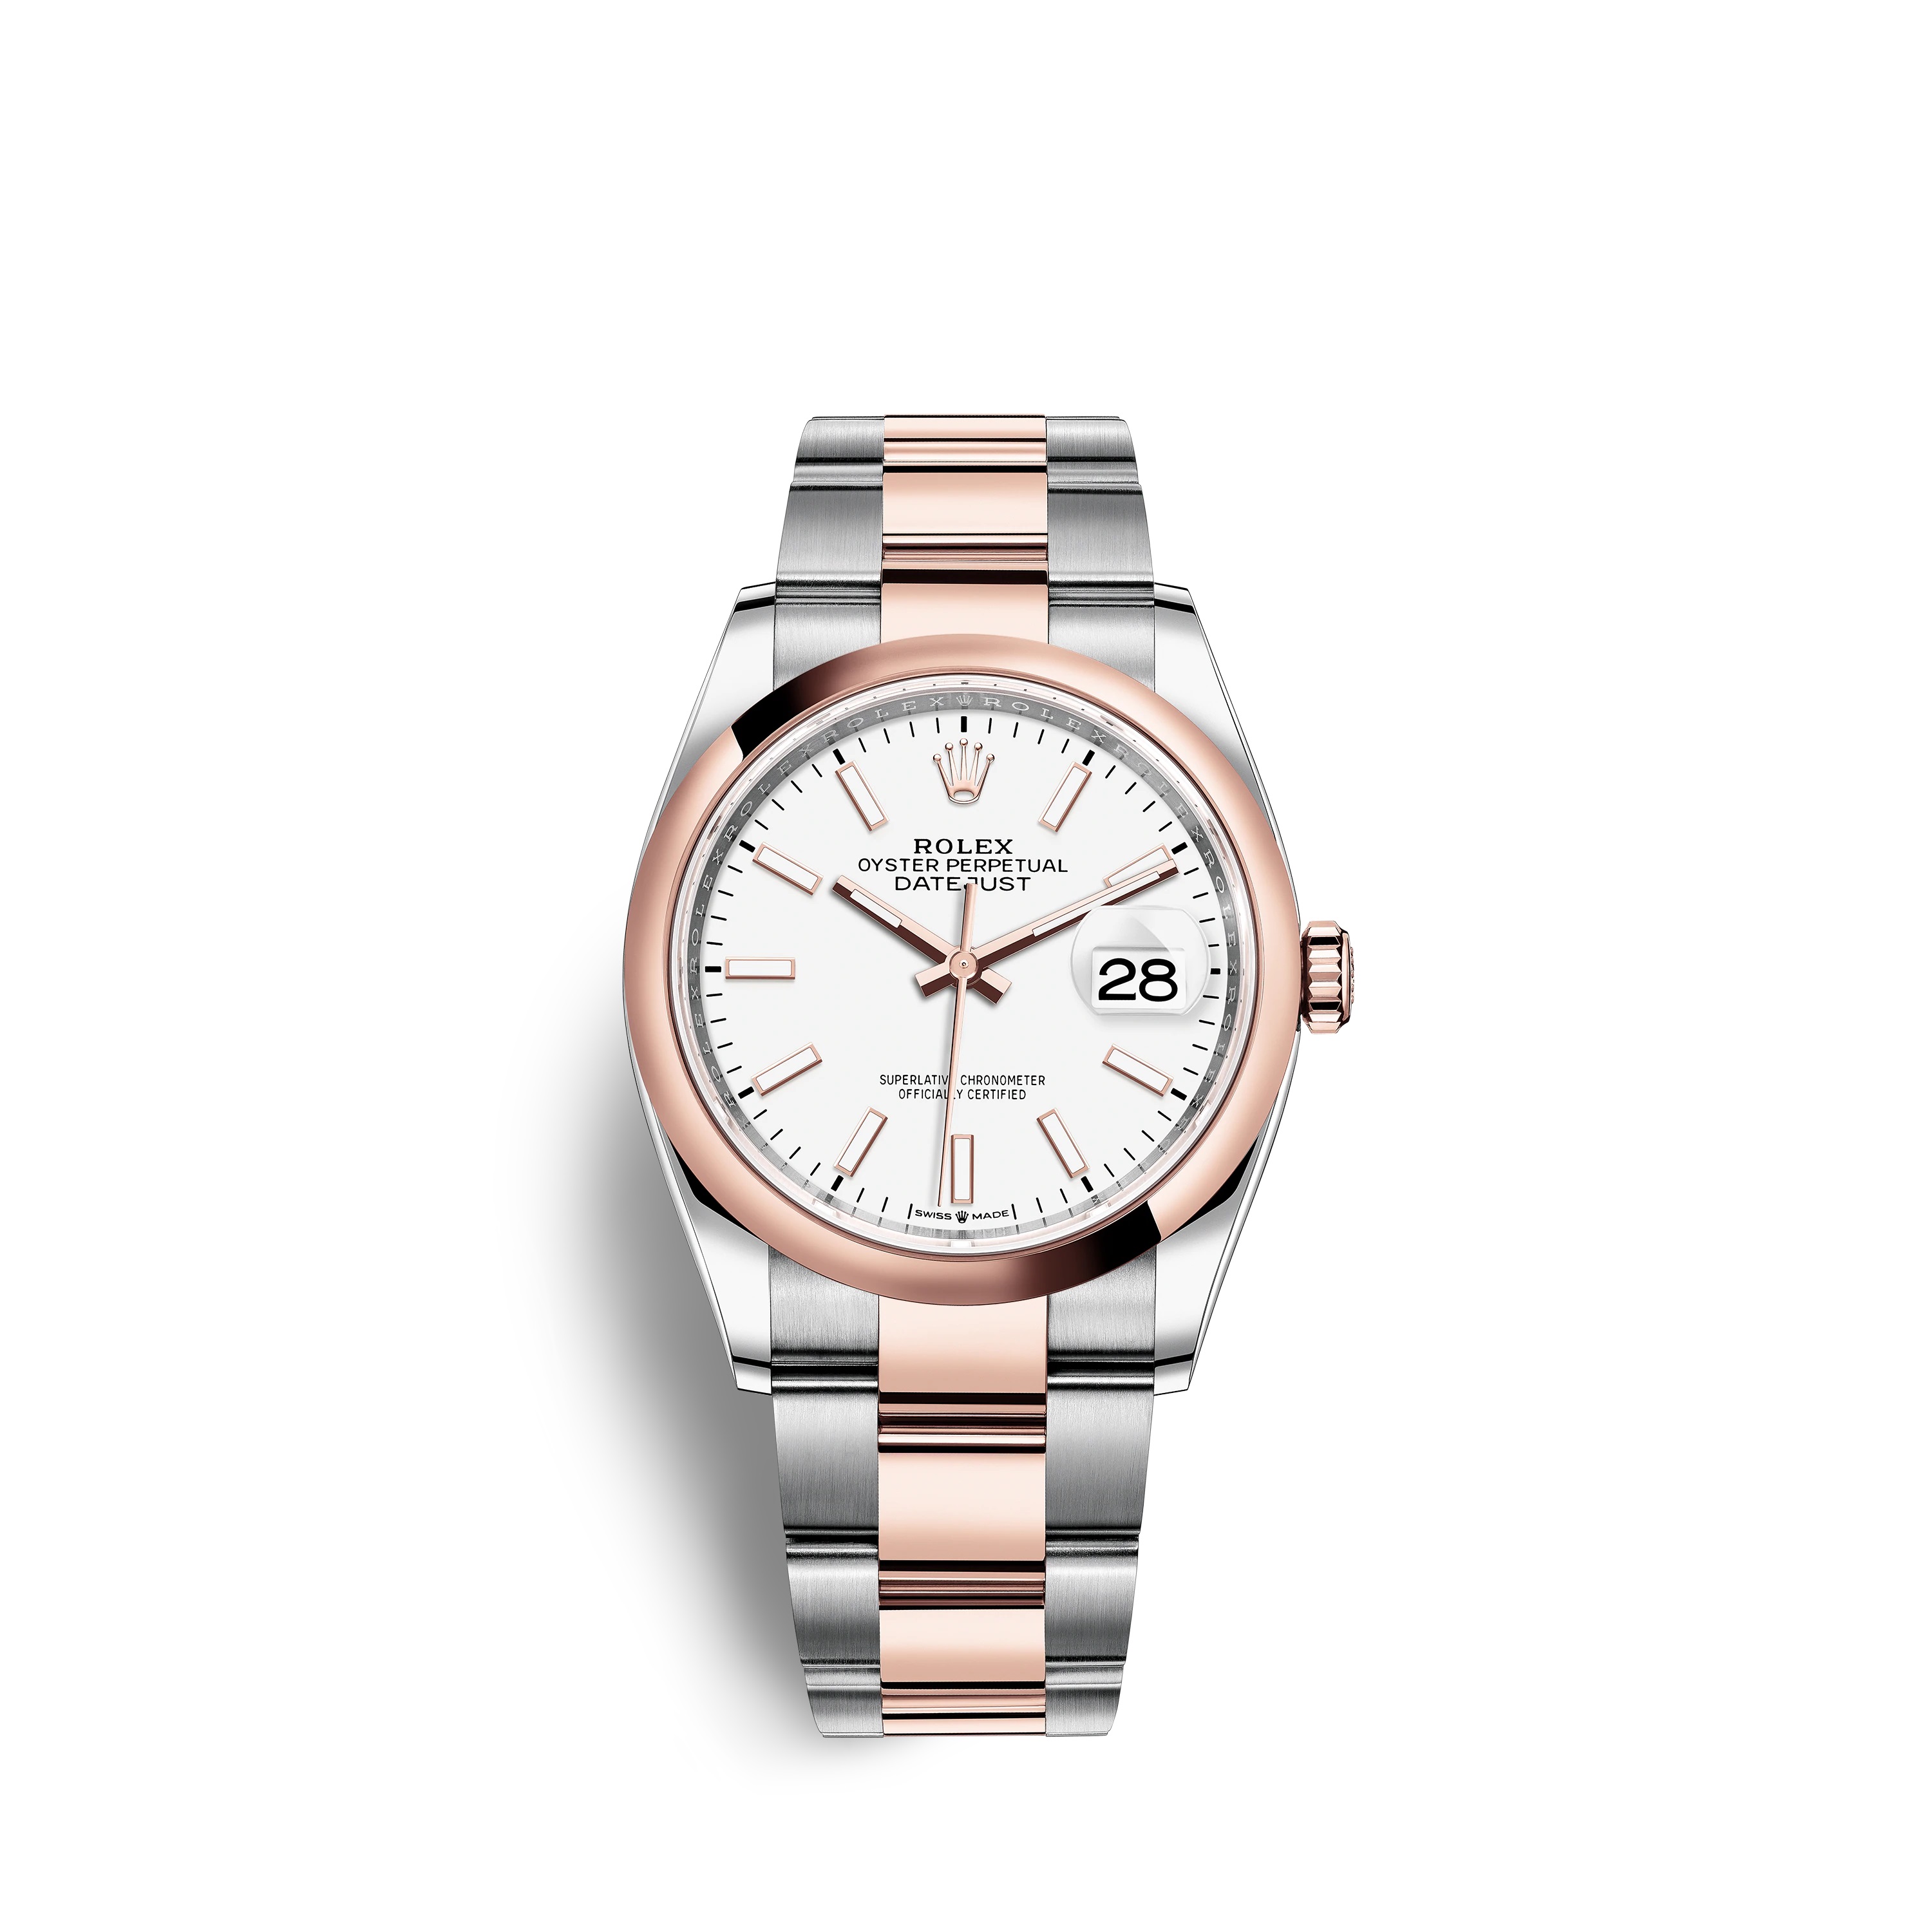 Datejust 36 126201 Rose Gold & Stainless Steel Watch (White)